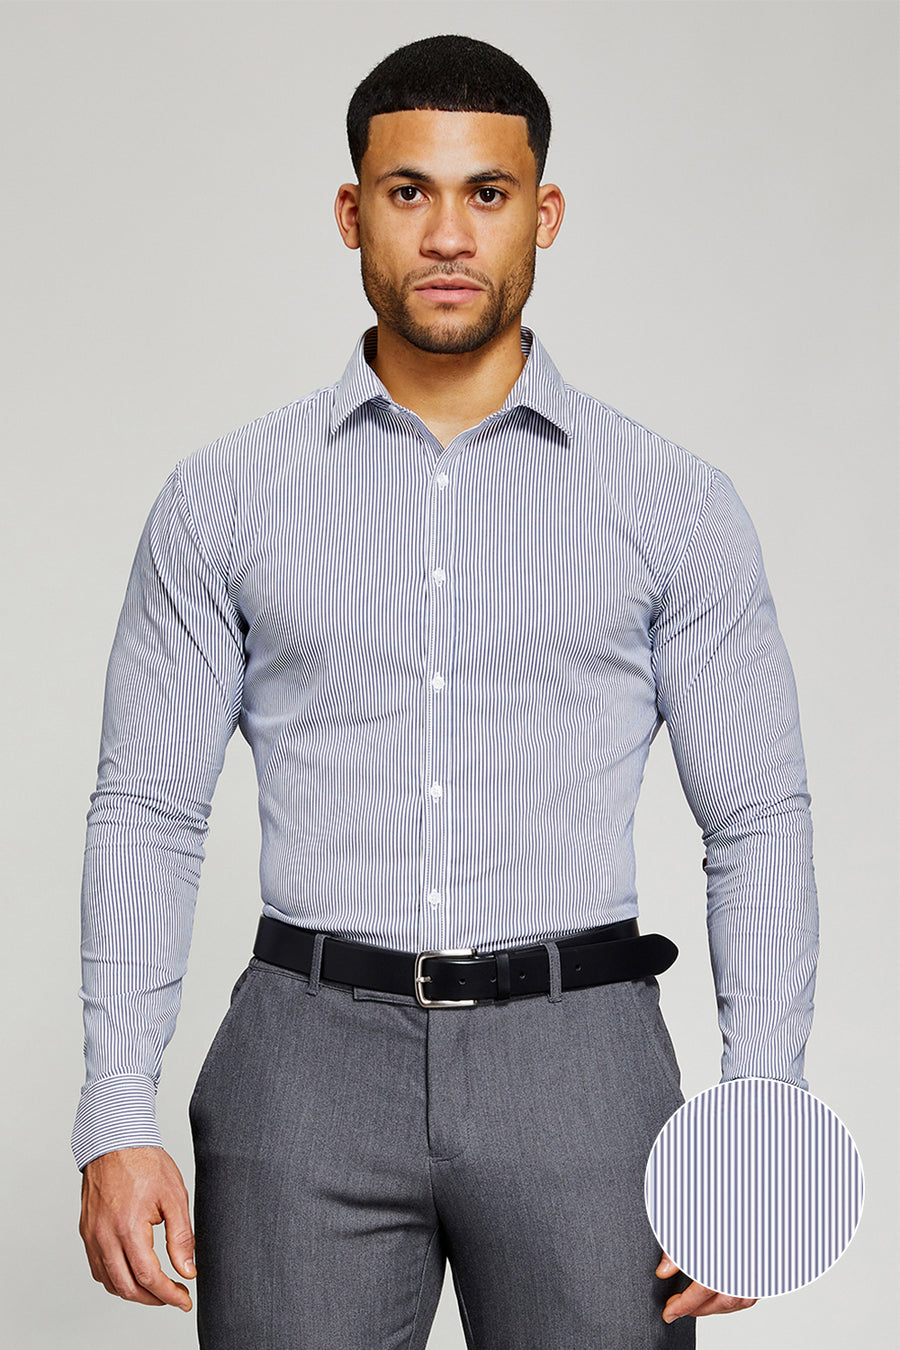 Essential Business Shirt in Striped Navy - TAILORED ATHLETE - USA